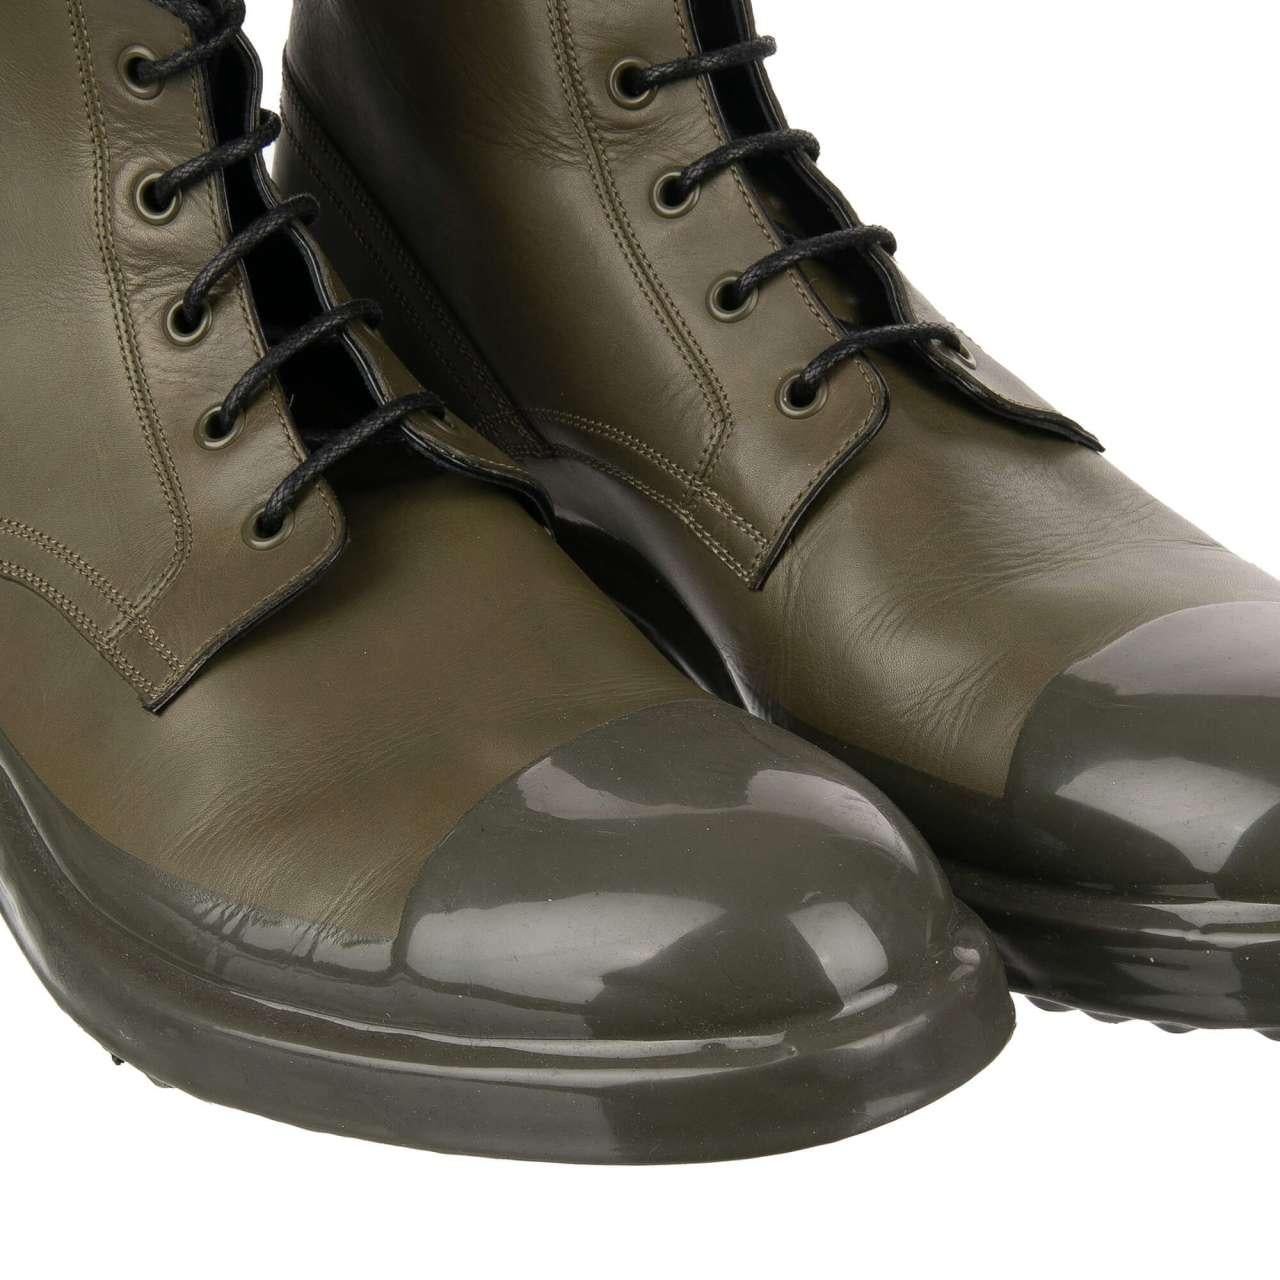 Dolce & Gabbana DG Logo Leather Ankle Boots FIRENZE Military Green EUR 42 For Sale 1